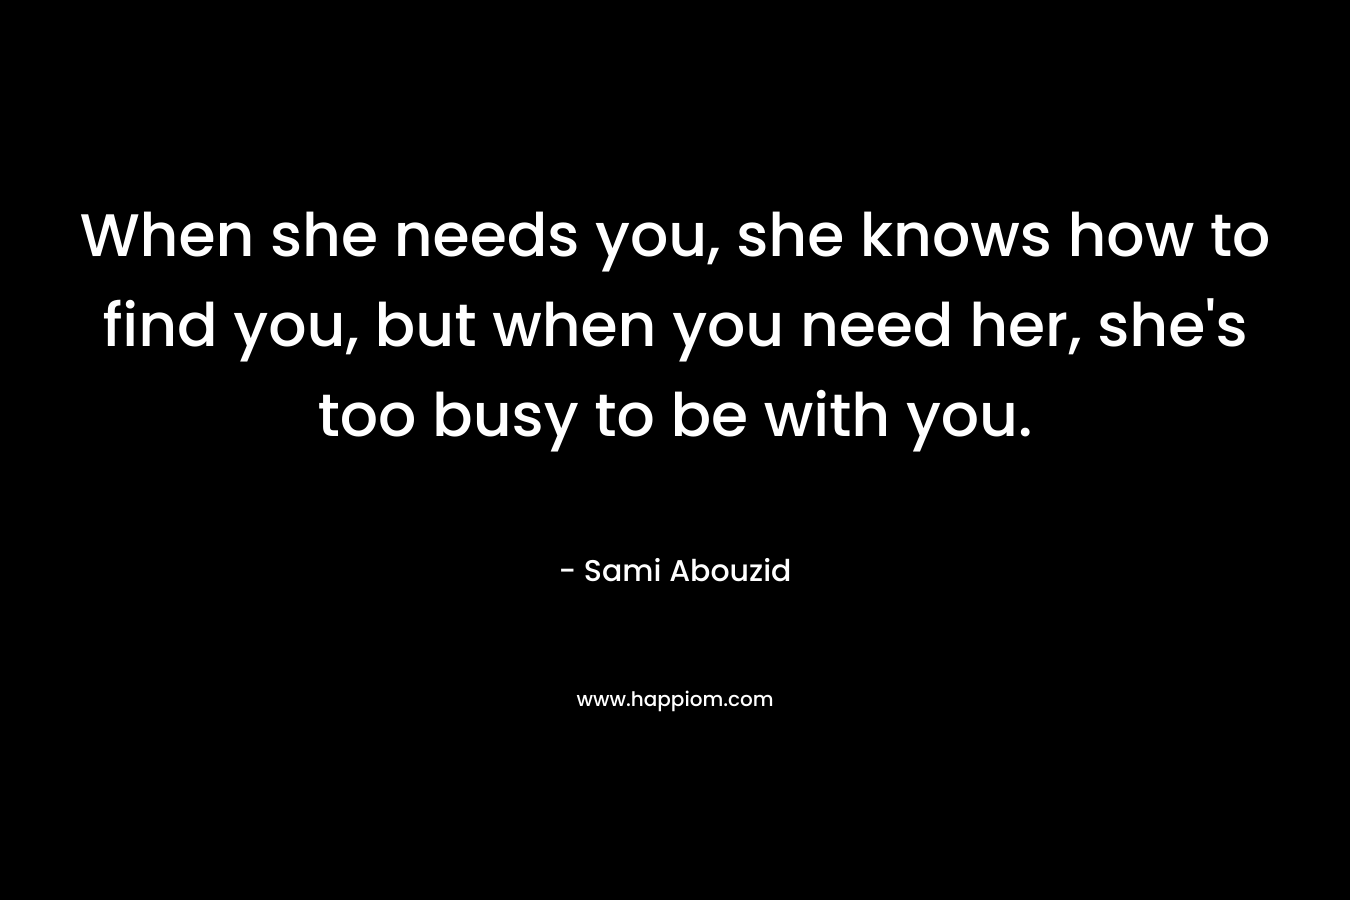 When she needs you, she knows how to find you, but when you need her, she's too busy to be with you.